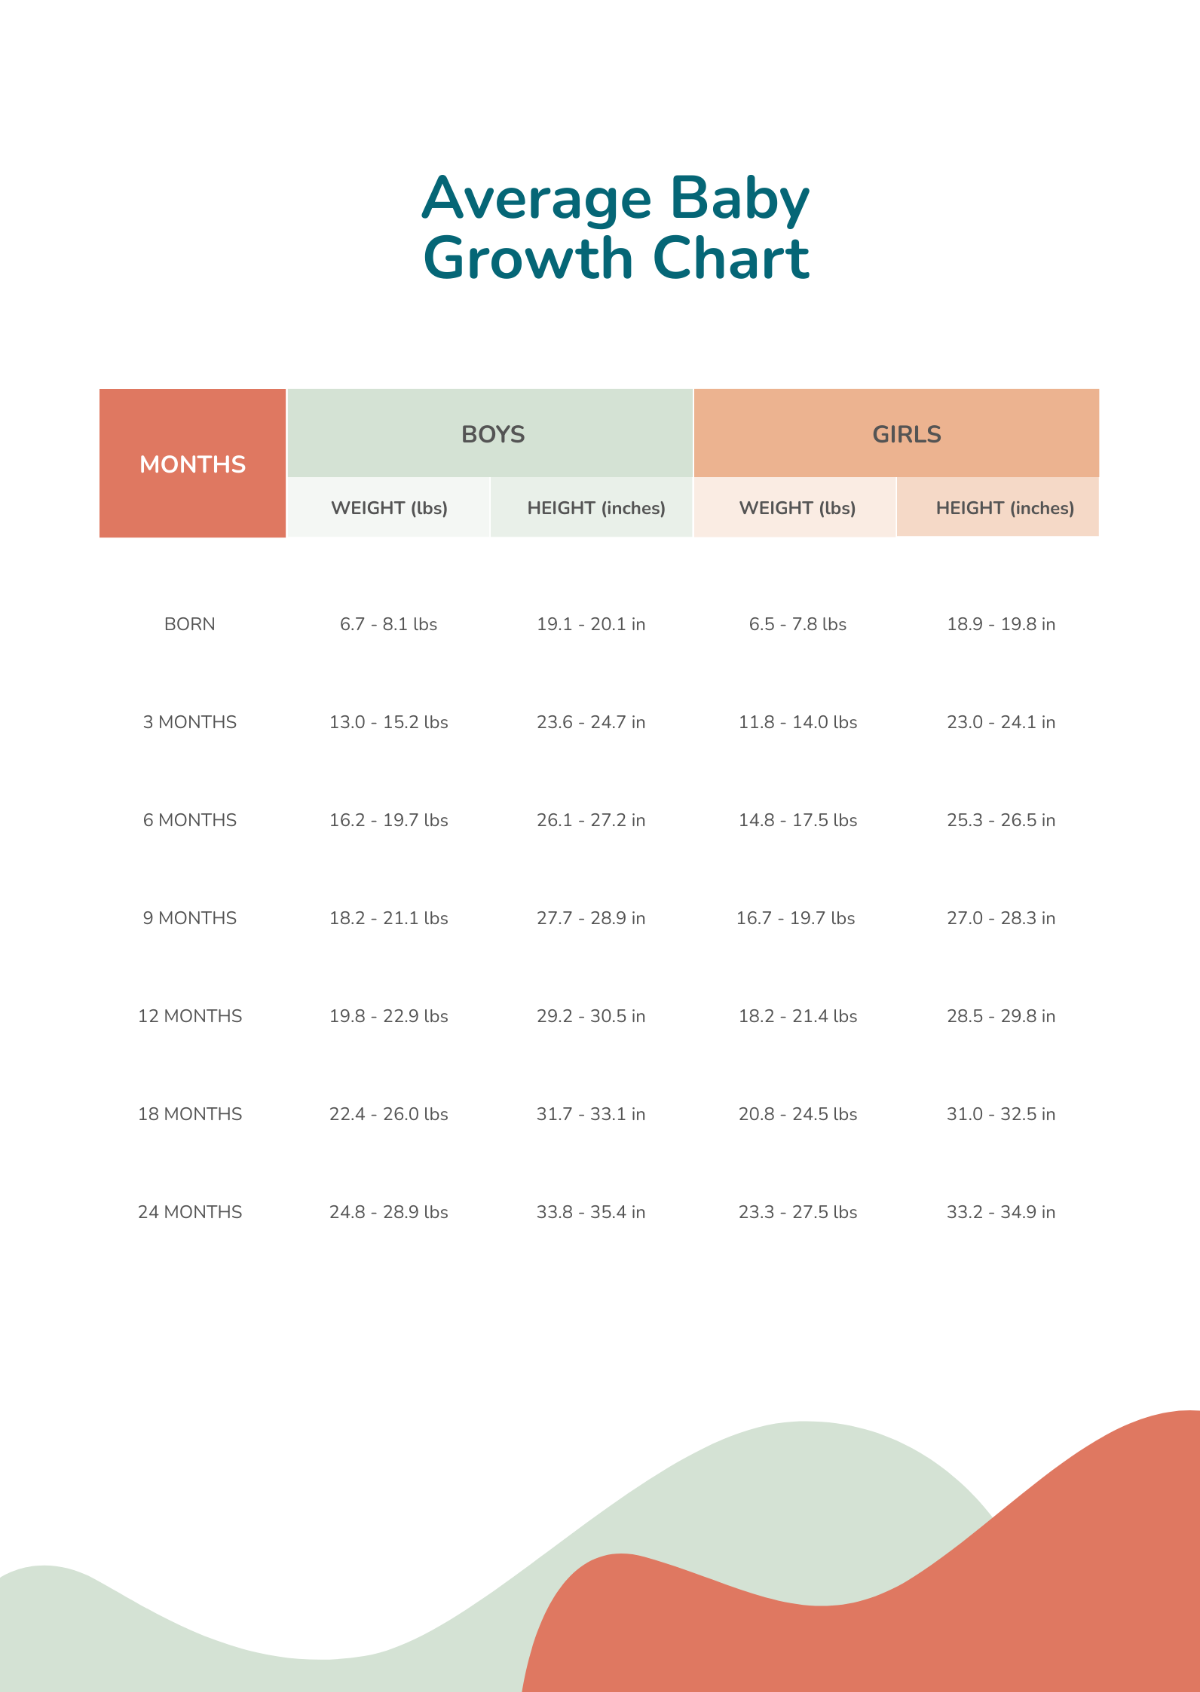 Average Baby Growth Chart Template